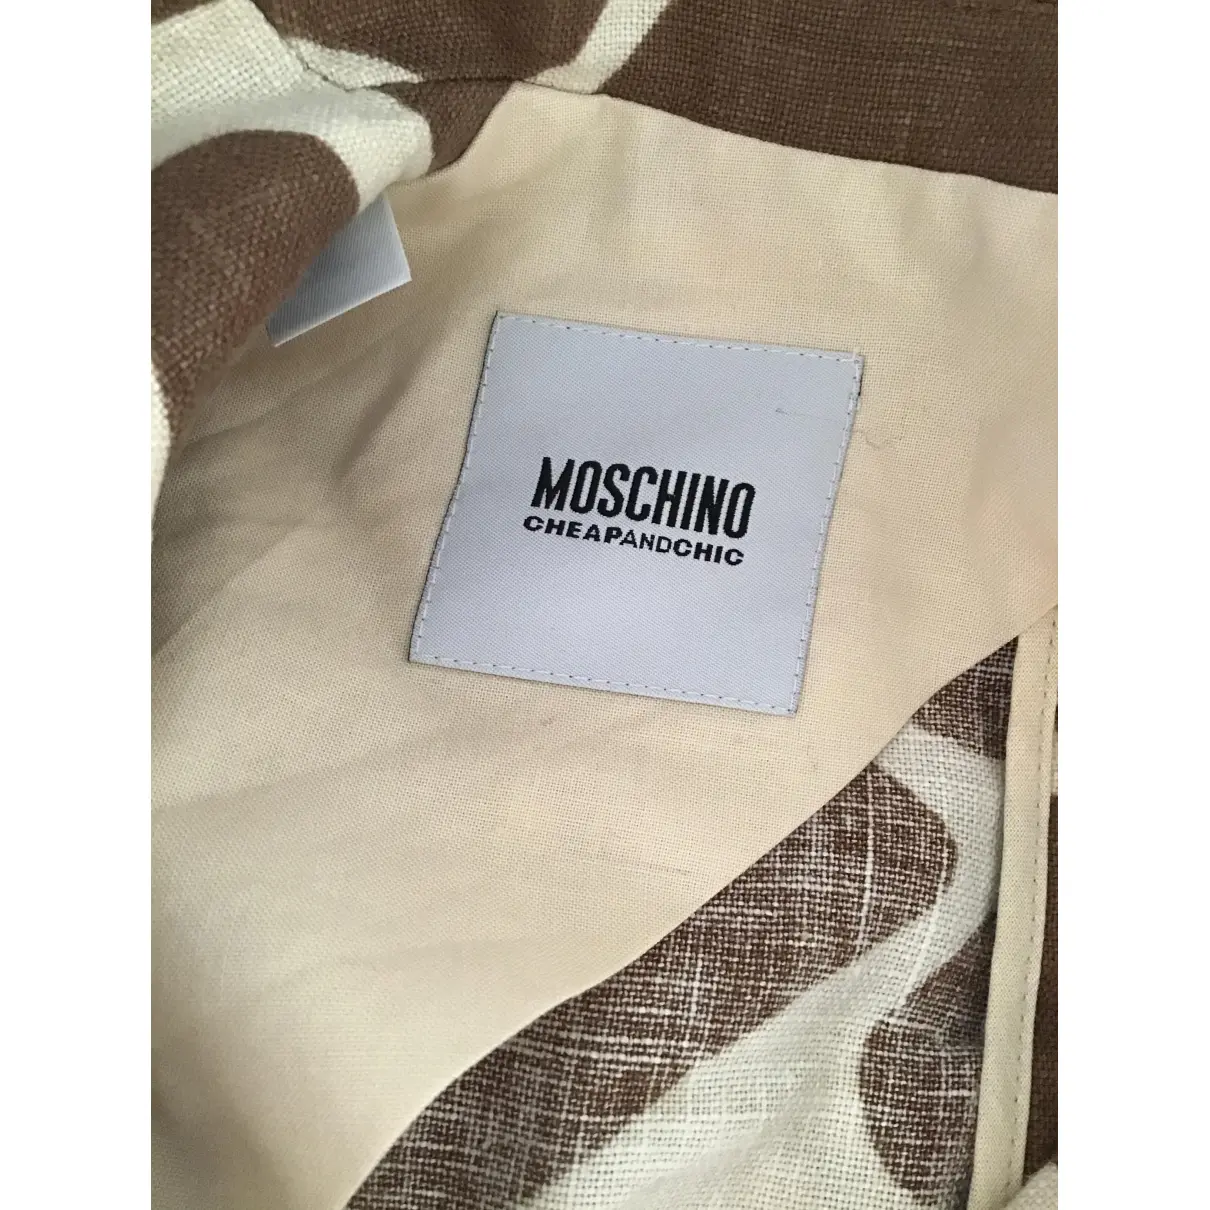 Linen suit jacket Moschino Cheap And Chic - Vintage